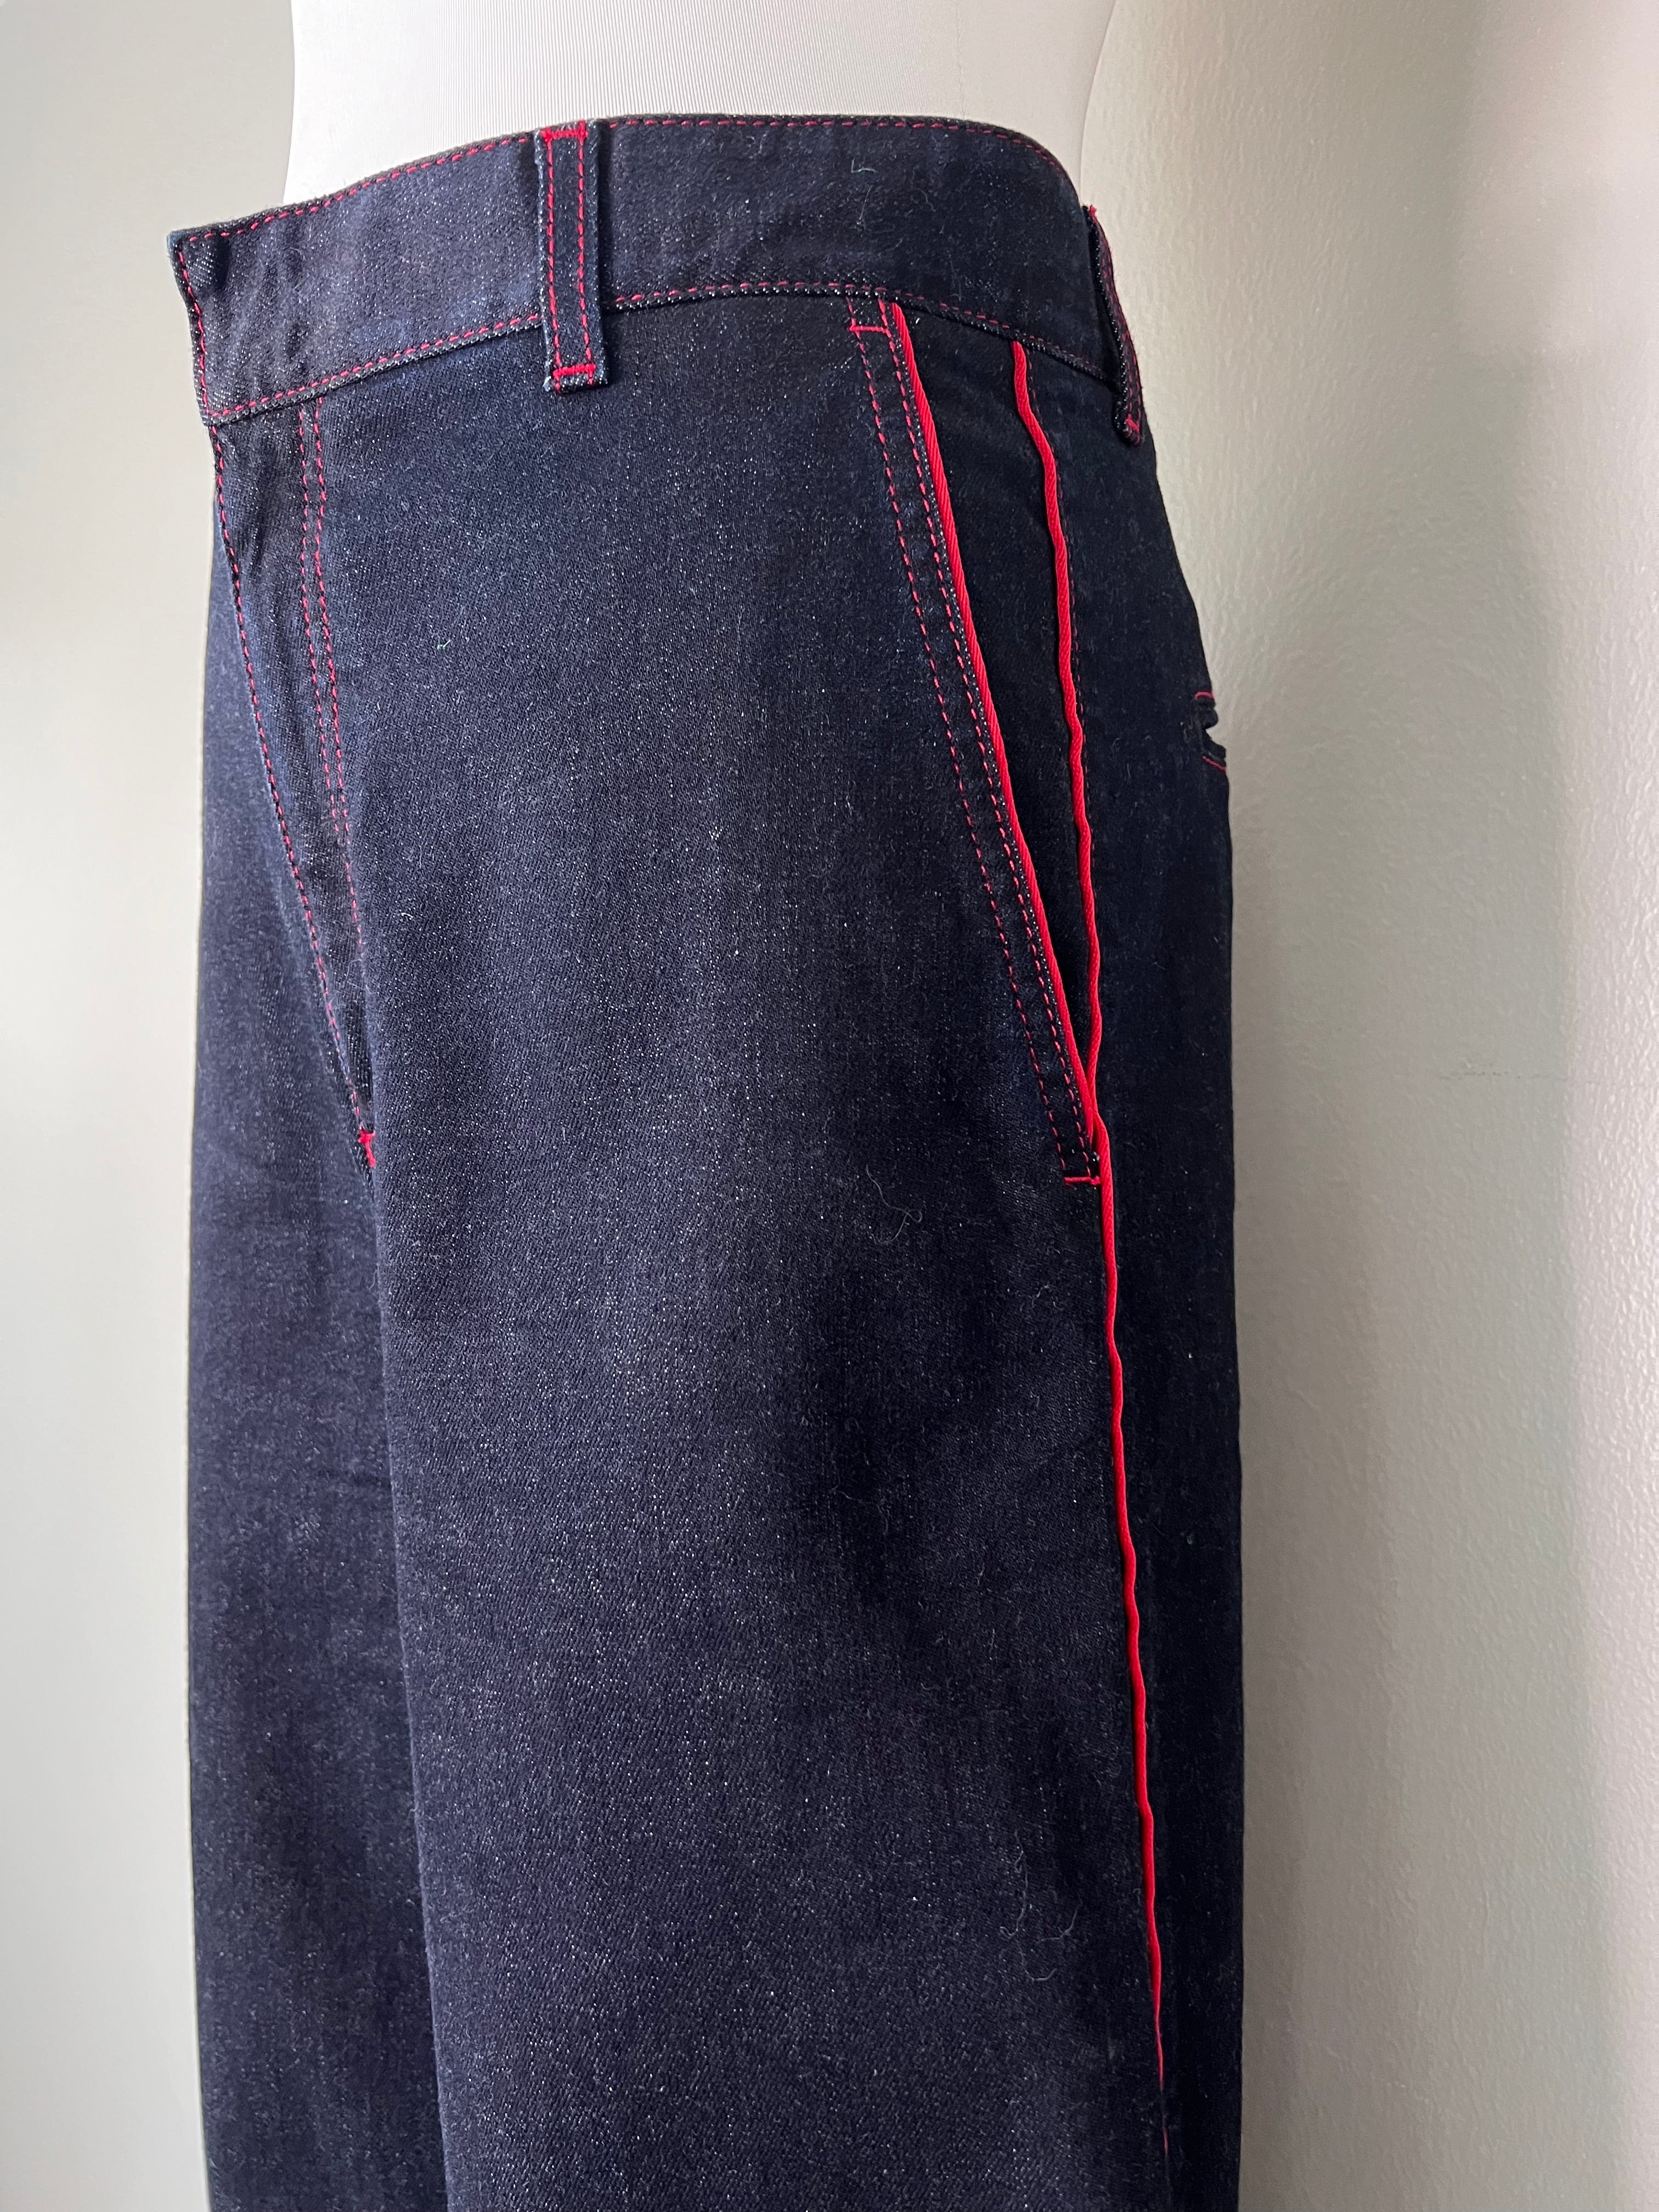 Dark wash super straight-legged jeans with a red seam along the side and the back pockets. - STELLA/ MCCARTNEY